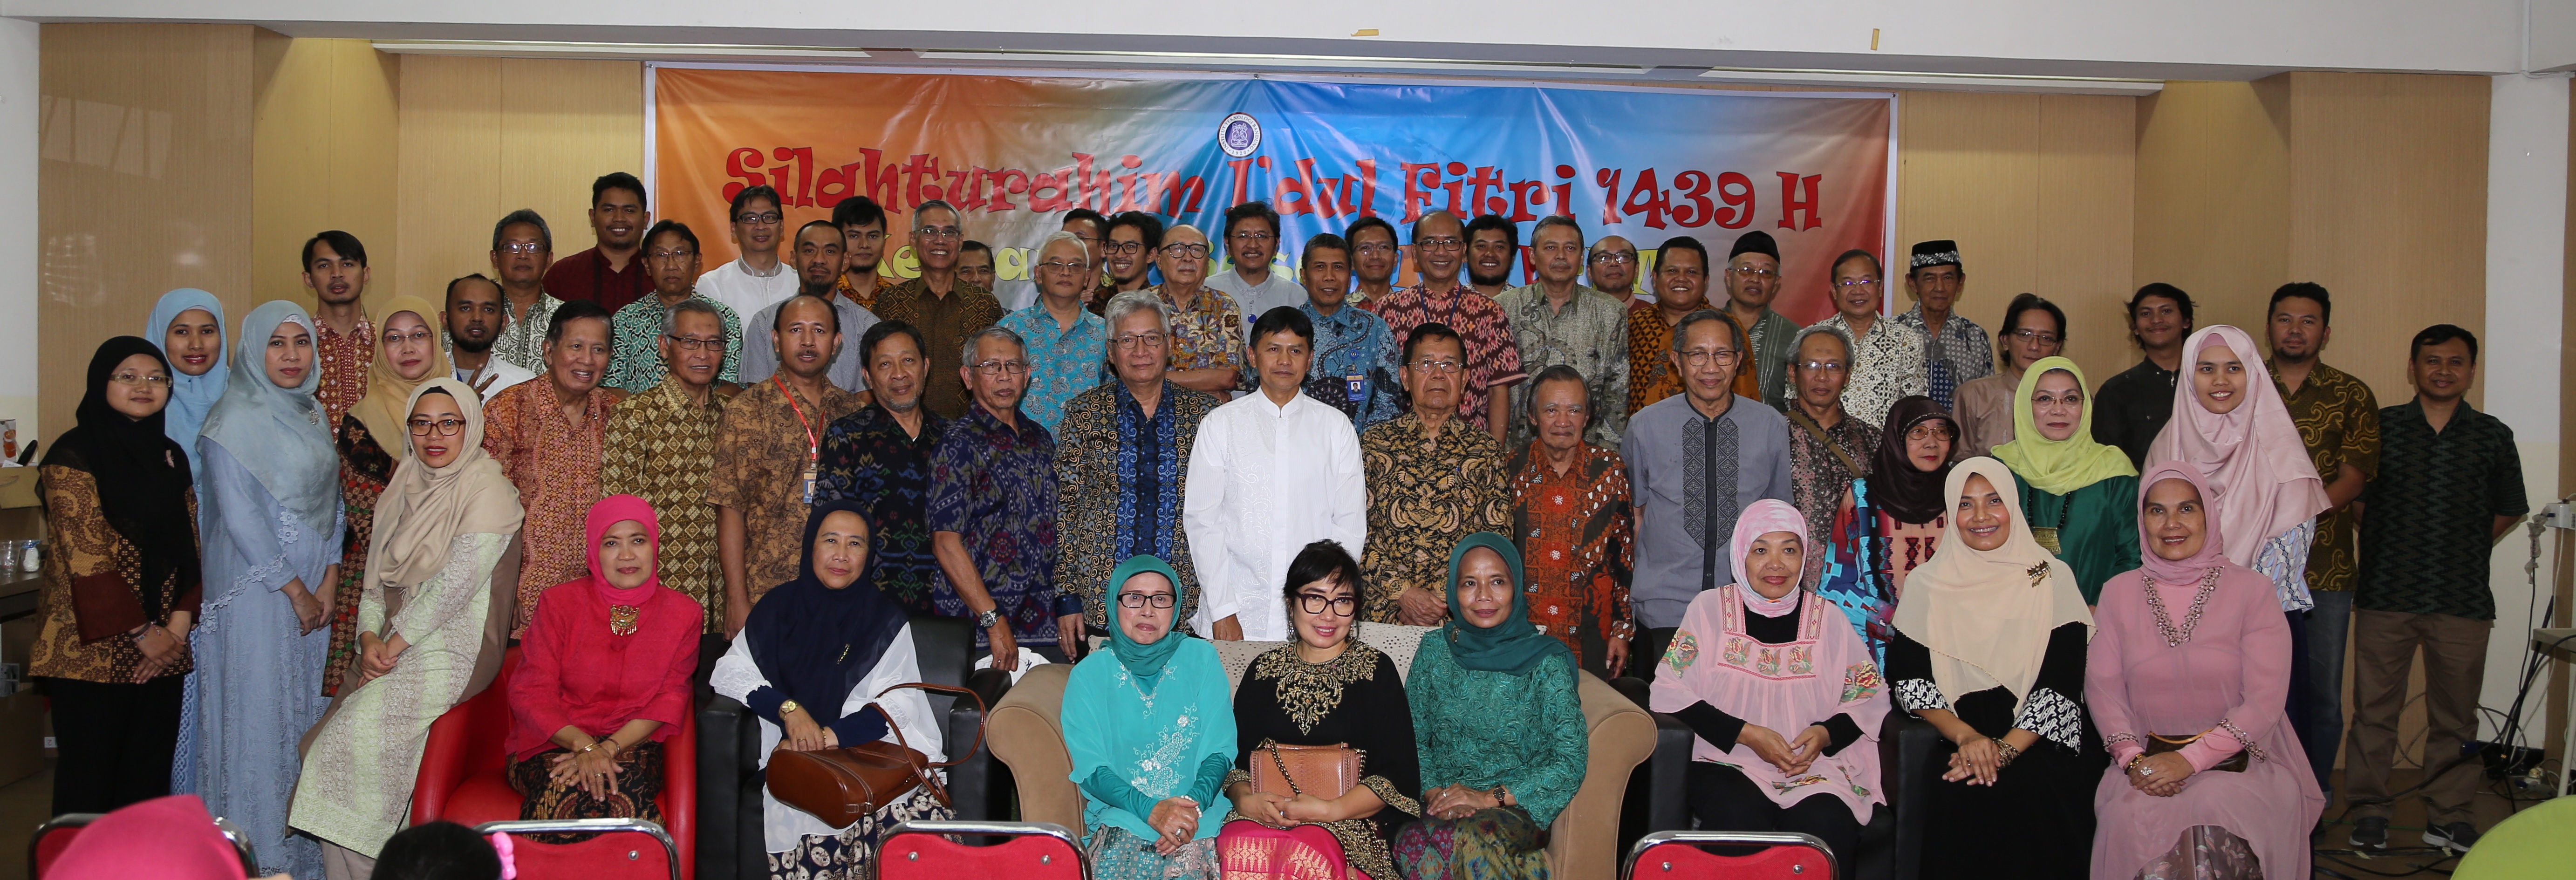 Gathering of Eid al-Fitr 1439 H – Family of FITB-ITB